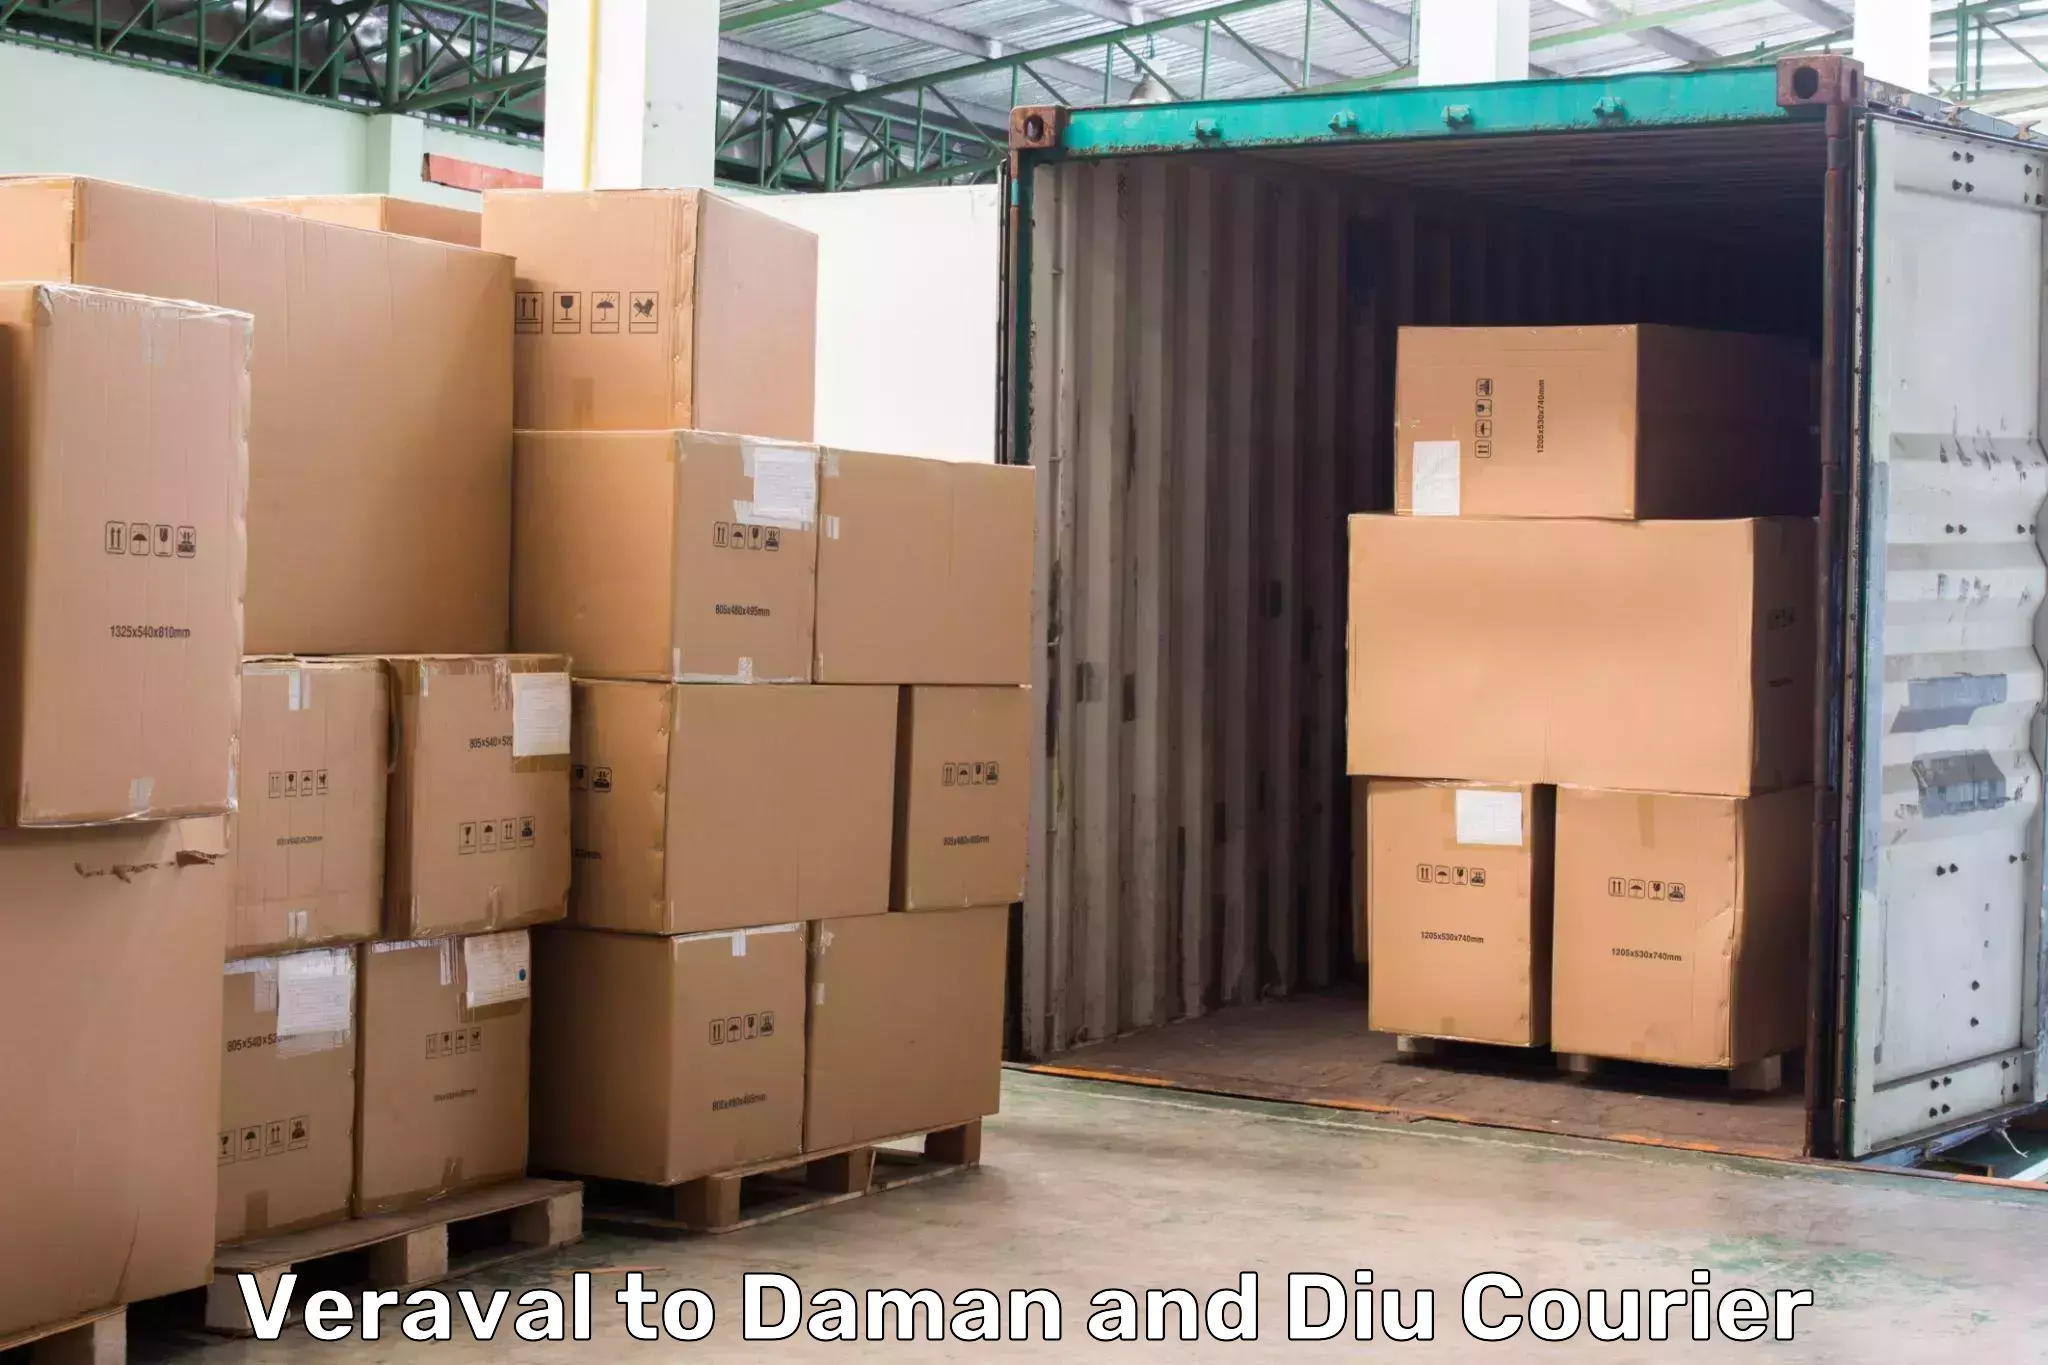 Global freight services Veraval to Daman and Diu